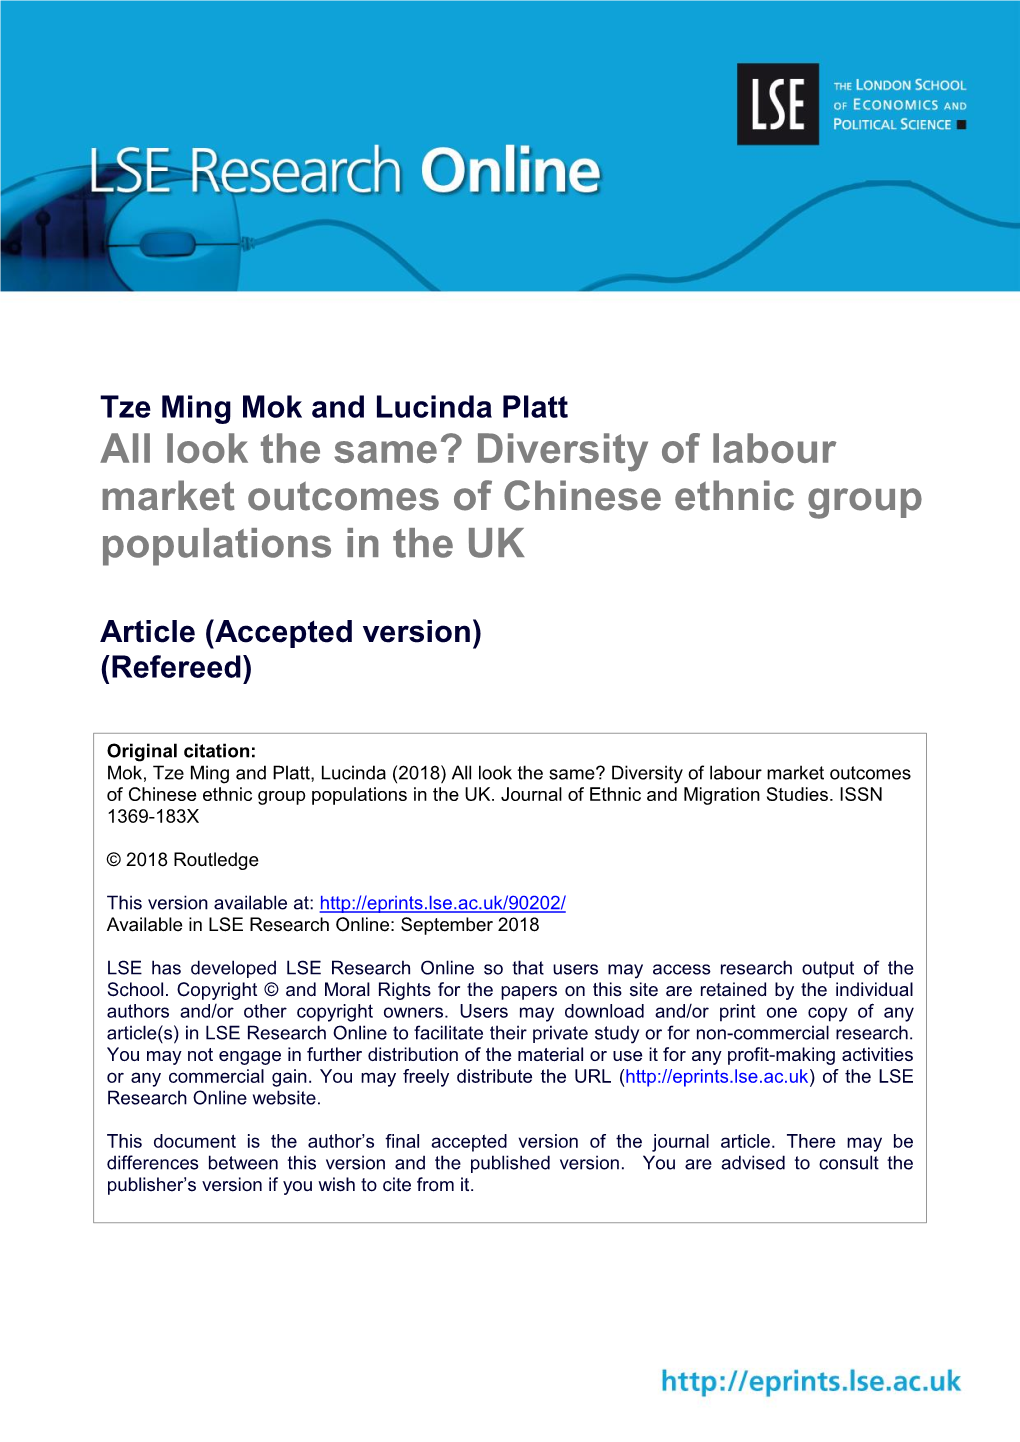 All Look the Same? Diversity of Labour Market Outcomes of Chinese Ethnic Group Populations in the UK